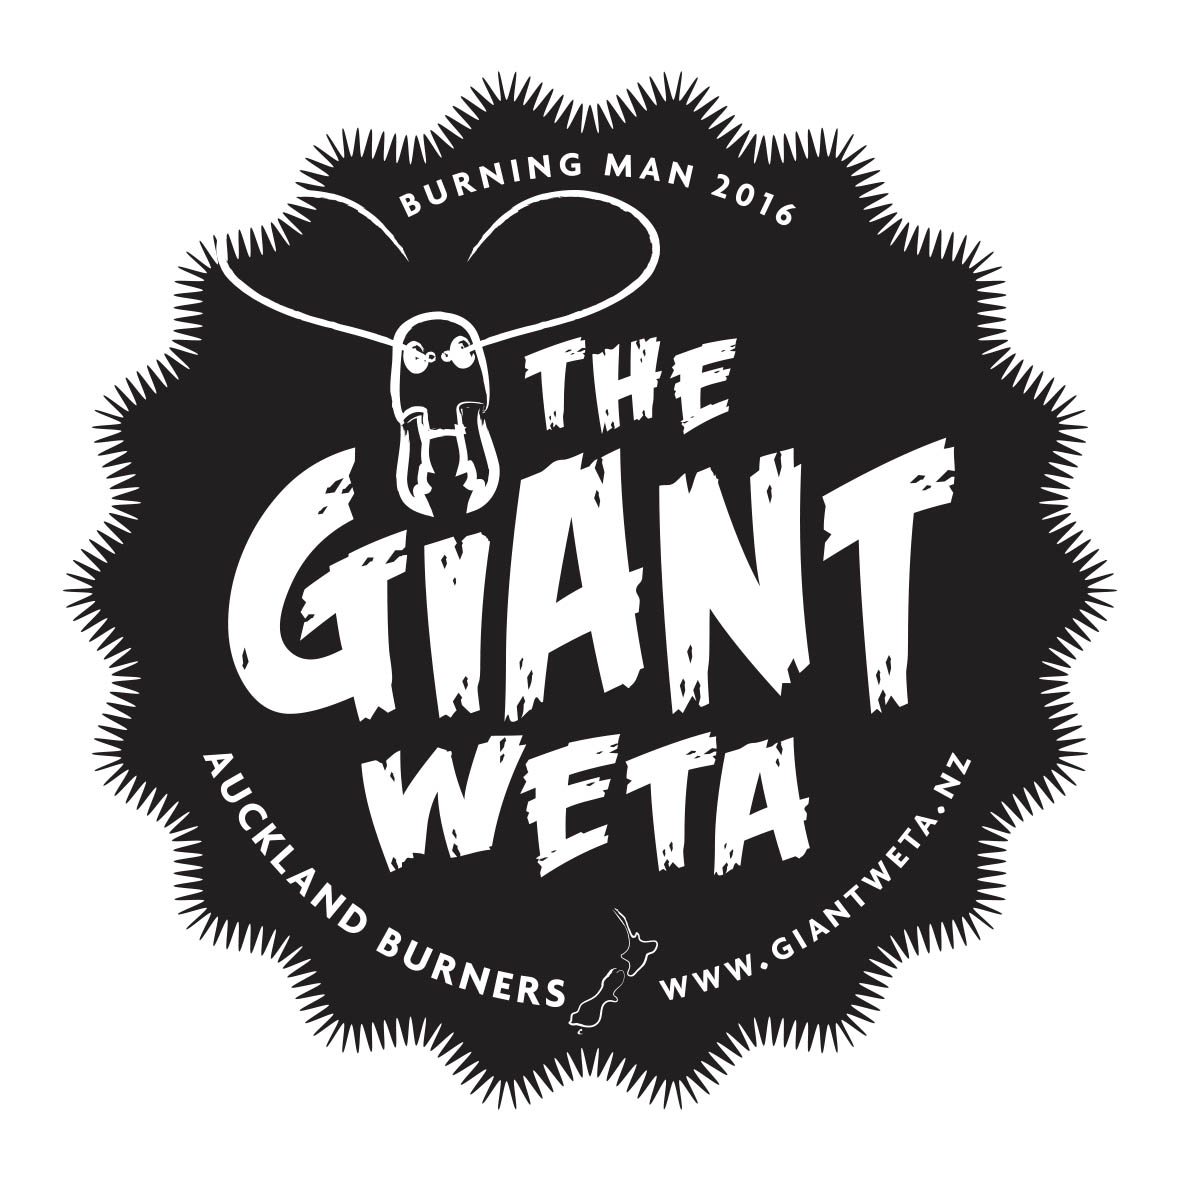 Help The Giant Weta get to the Playa